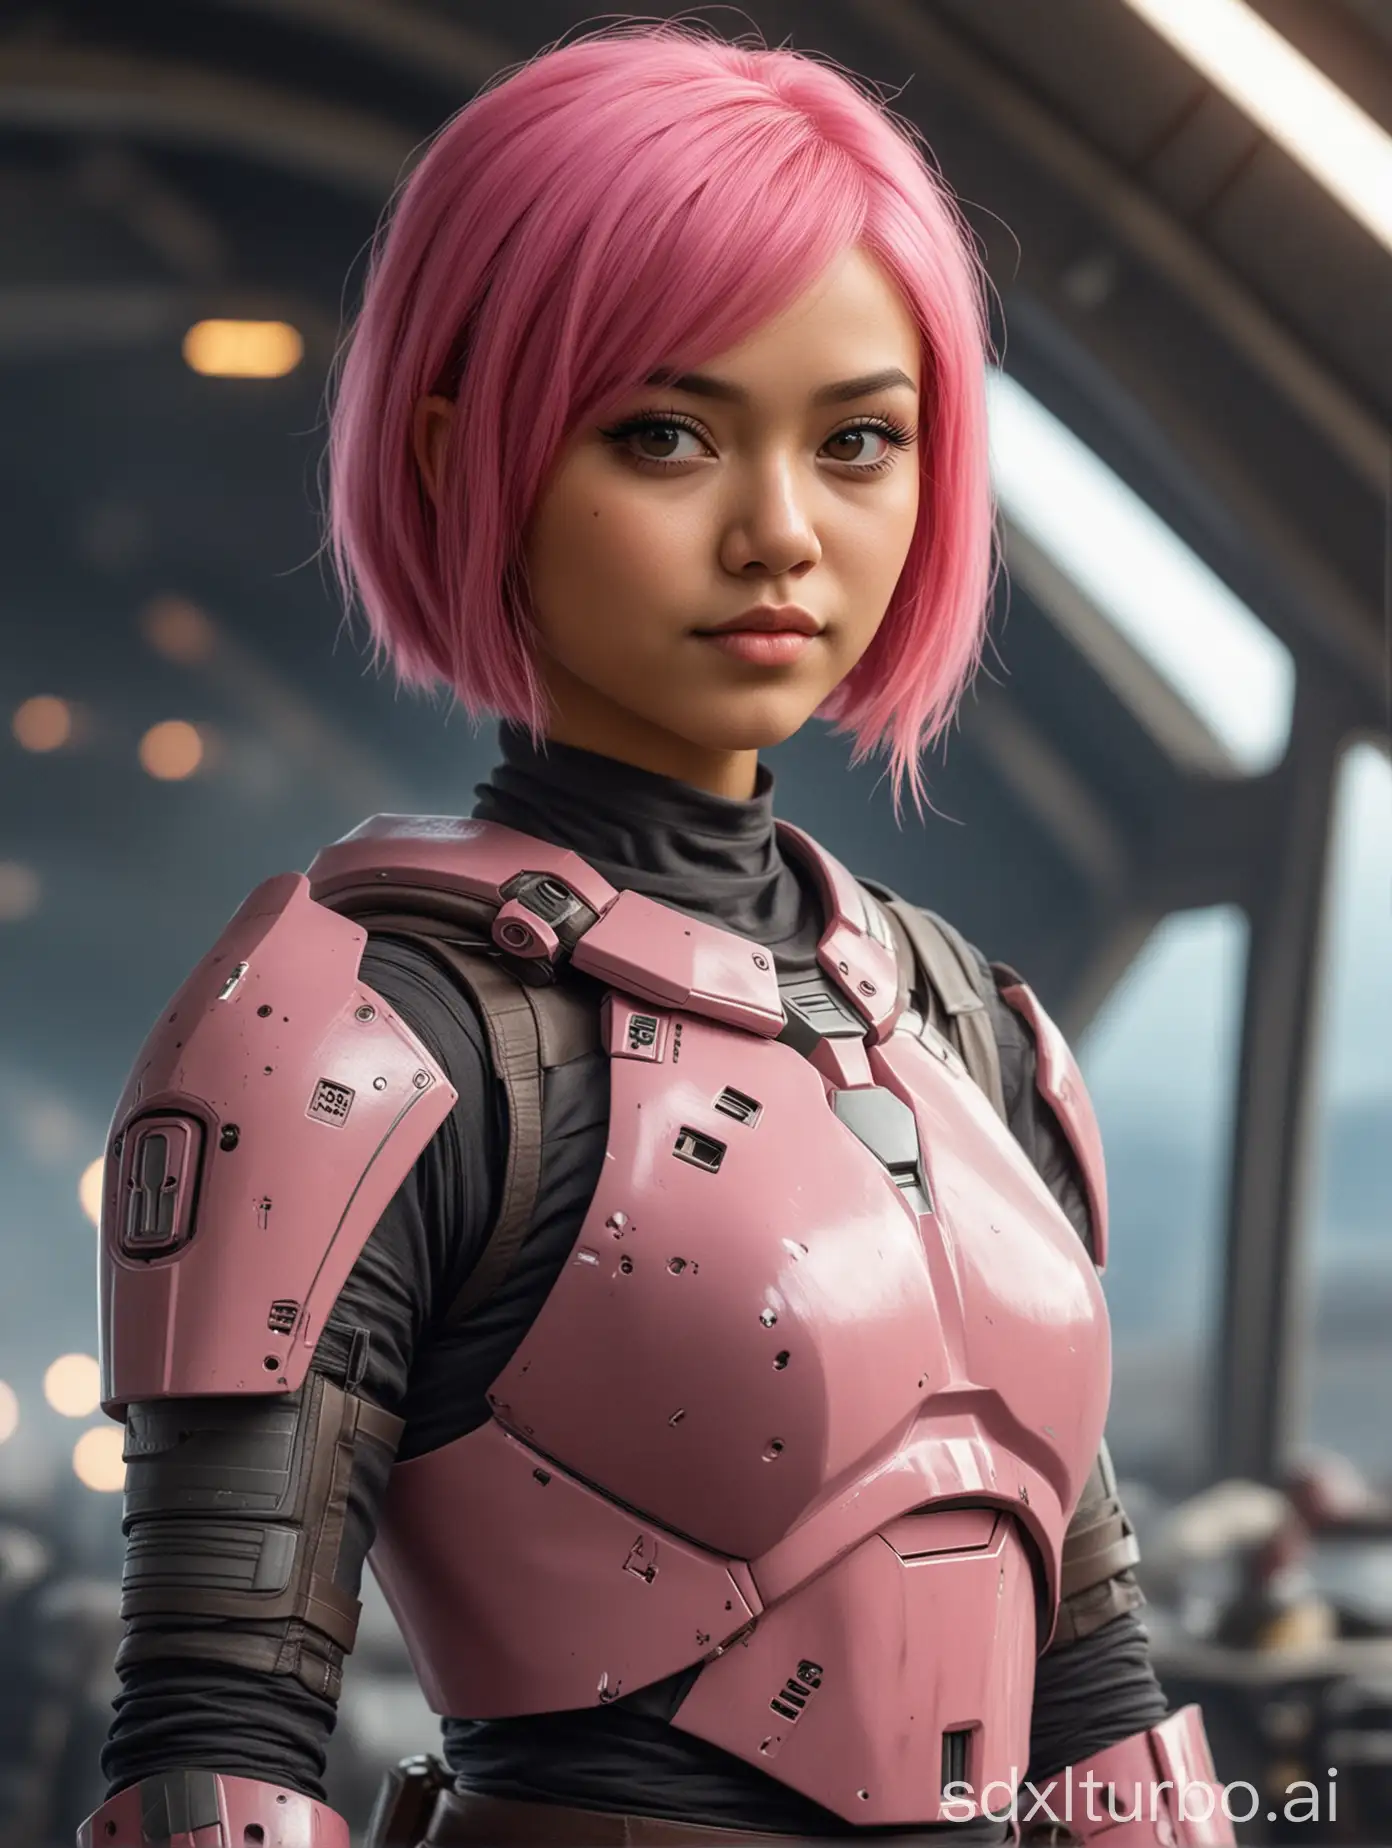 Mandalorian girl, 16-years-old, southeast Asian, short pink hair, at a spaceport